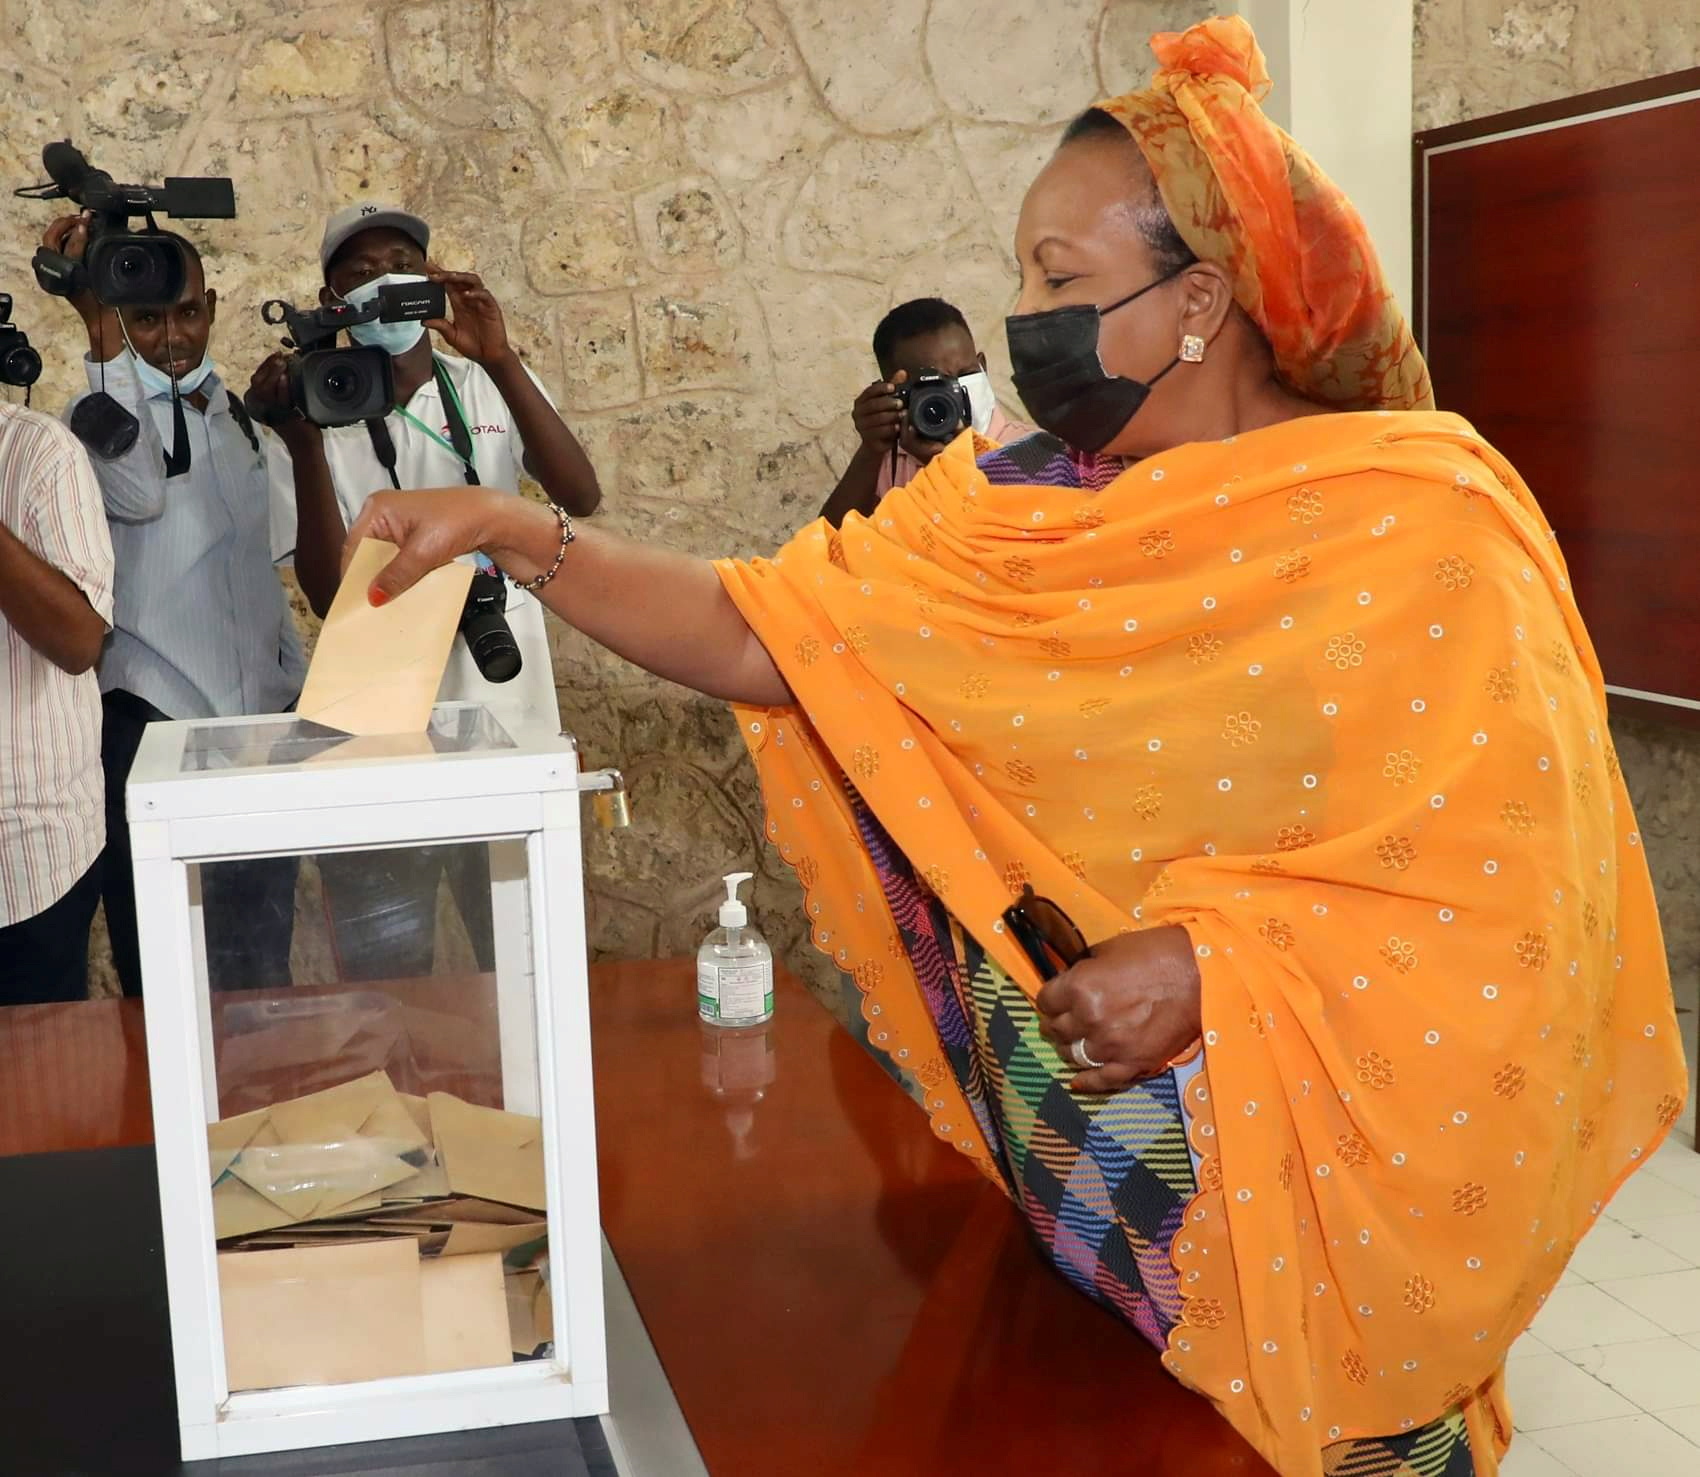 Djibouti's first lady Kadra Mahamoud Haid casts her ballot during the presidential elections at the Ras-Dika district polling centre in Djibouti